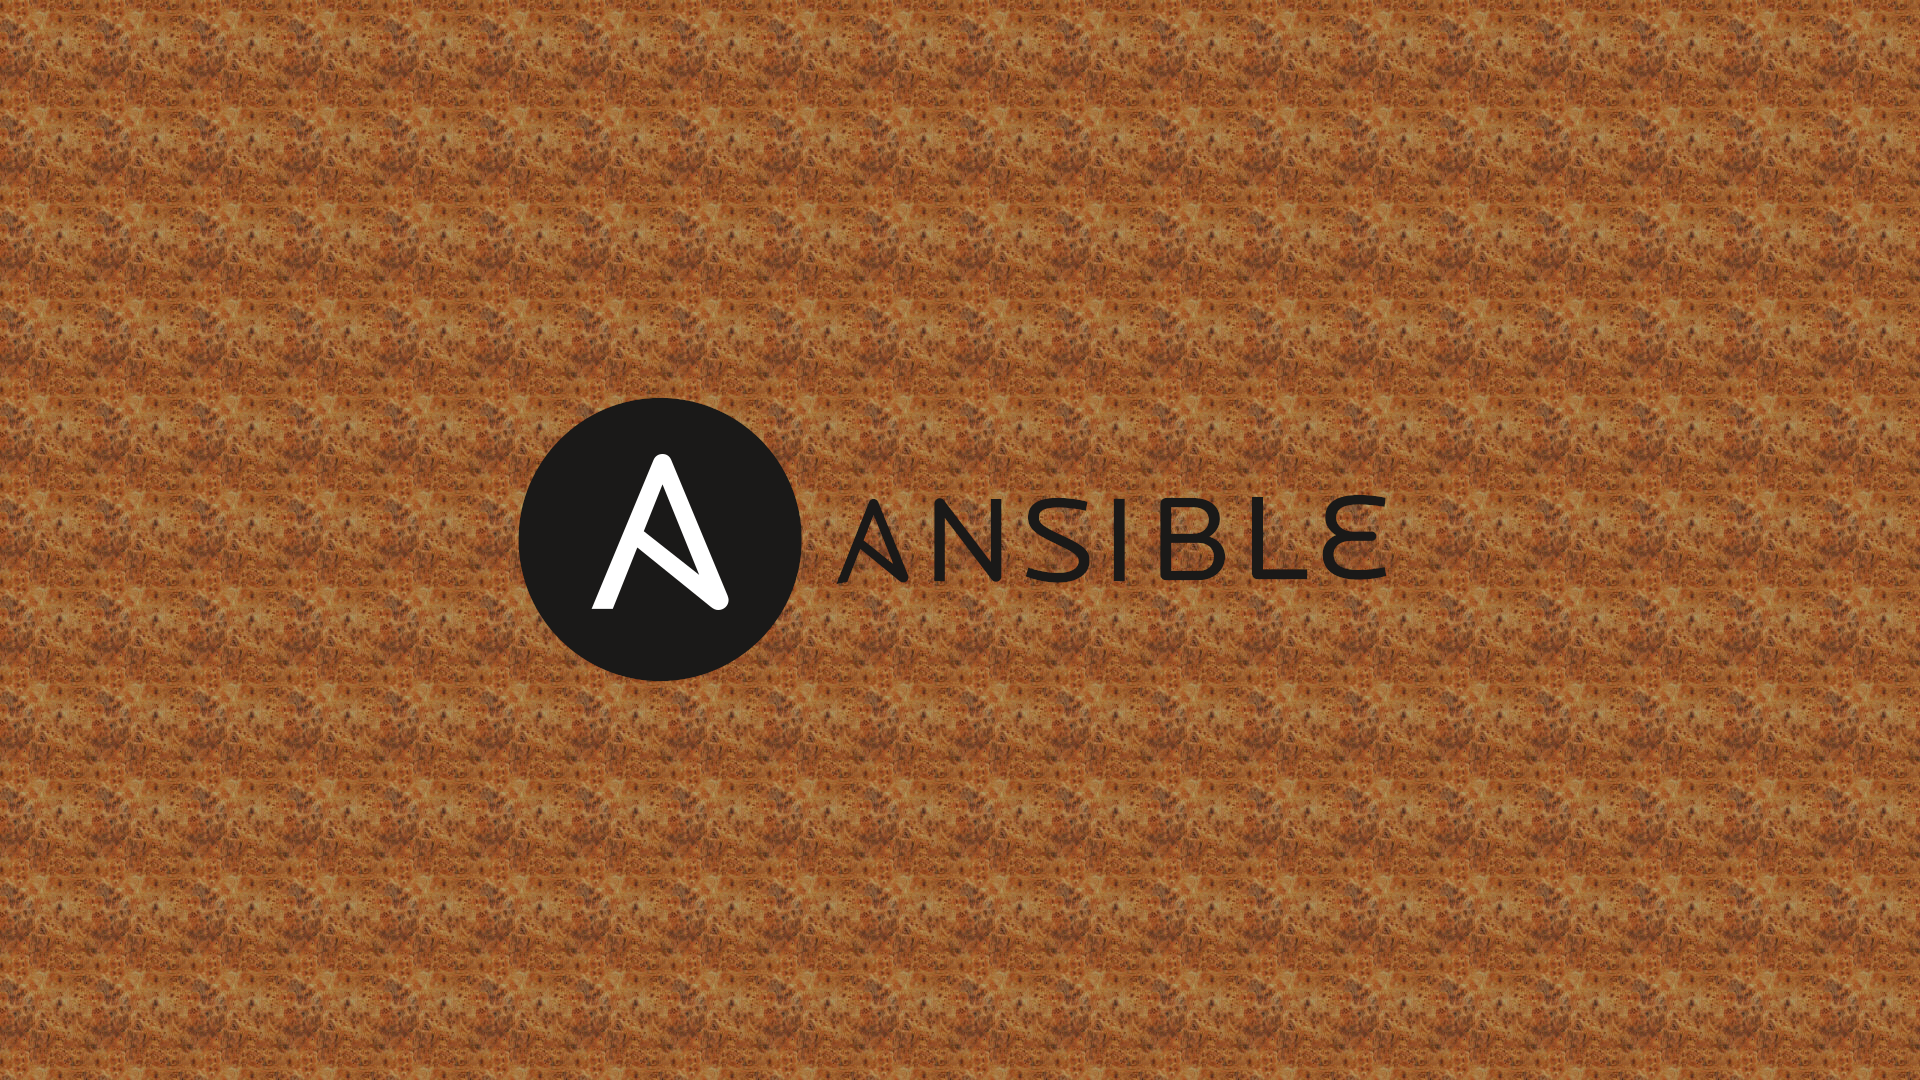 Upgrading packages with Ansible